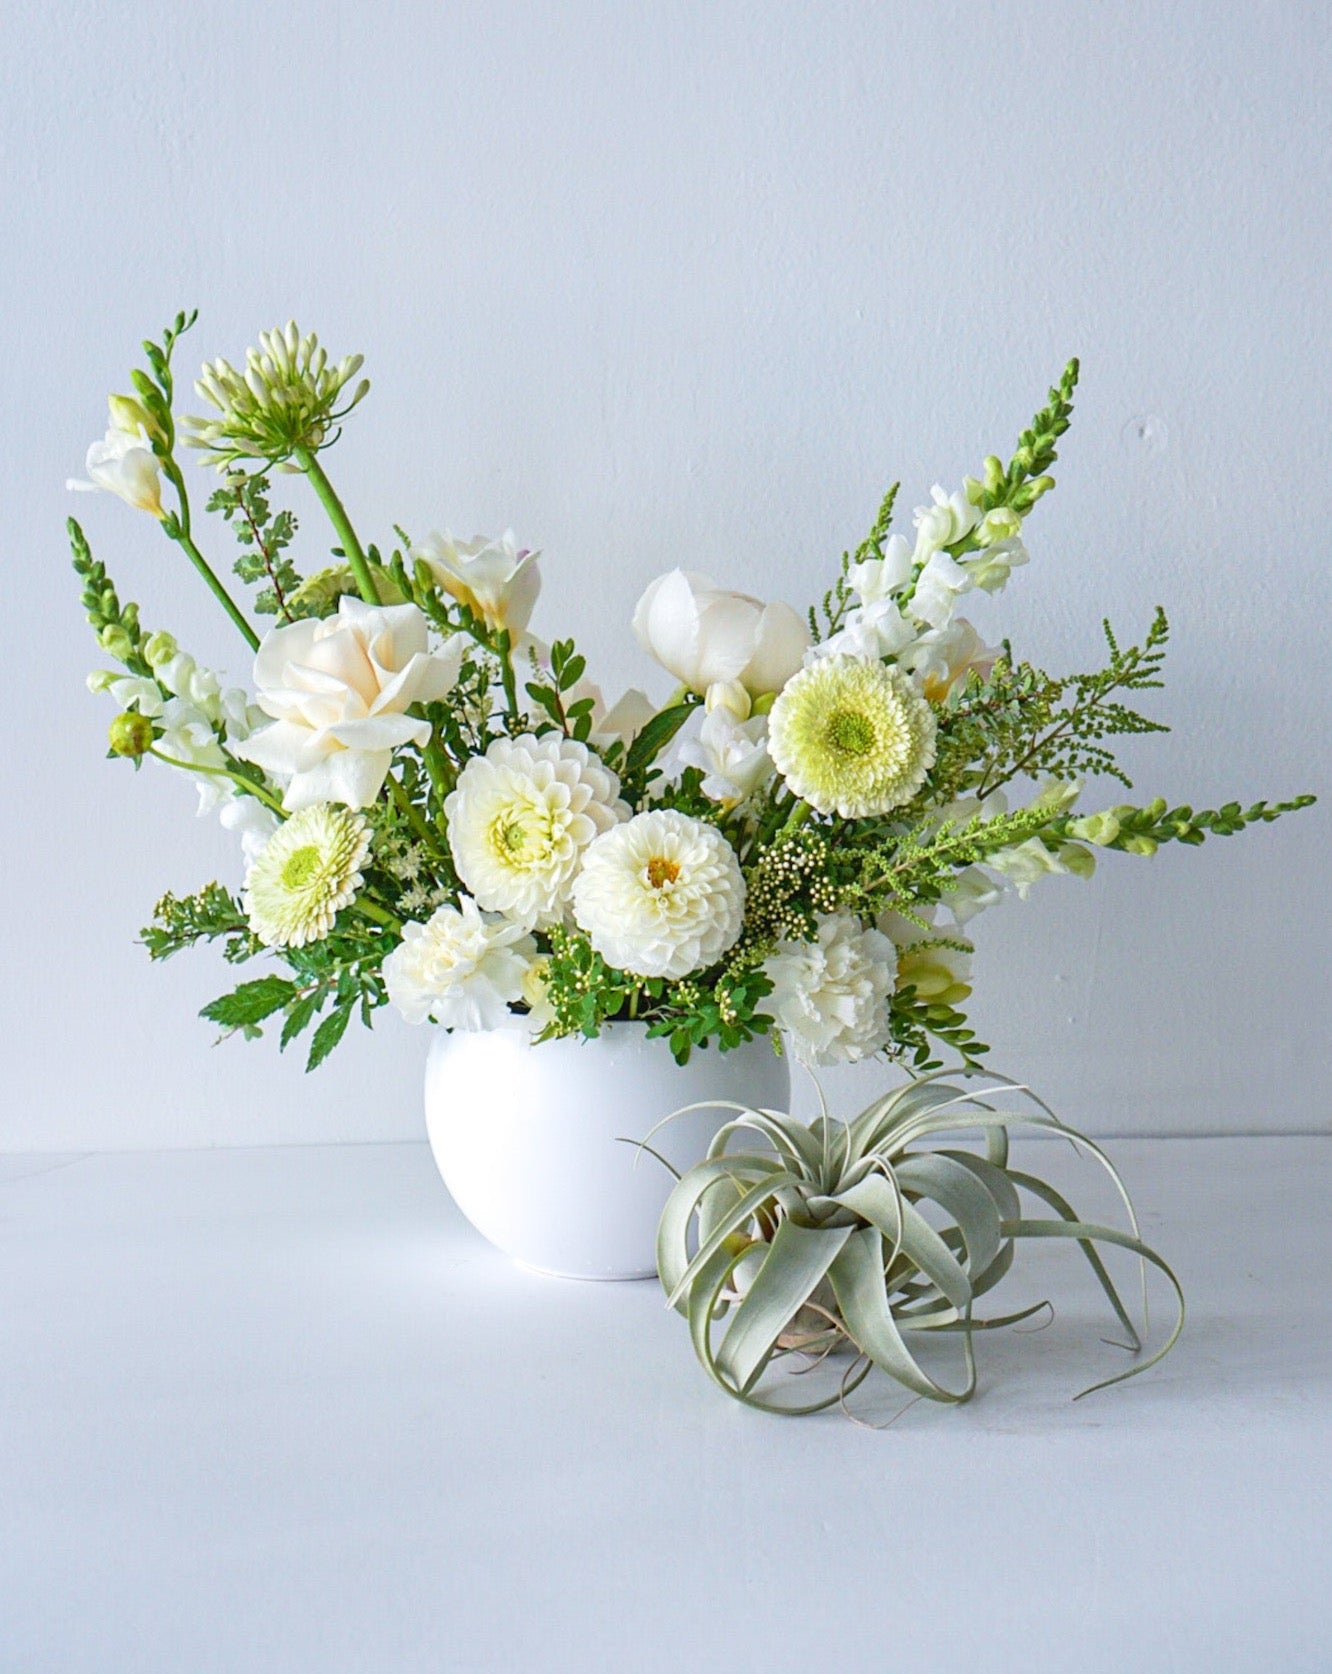 A stylish array of the seasons best crisp white and cream blooms in white bowl - an elegant gift for any occasion. We offer same-day or next-day delivery thought out Toronto and GTA. Toronto  Flower Delivery- The Flower Nook- Toronto Florist 